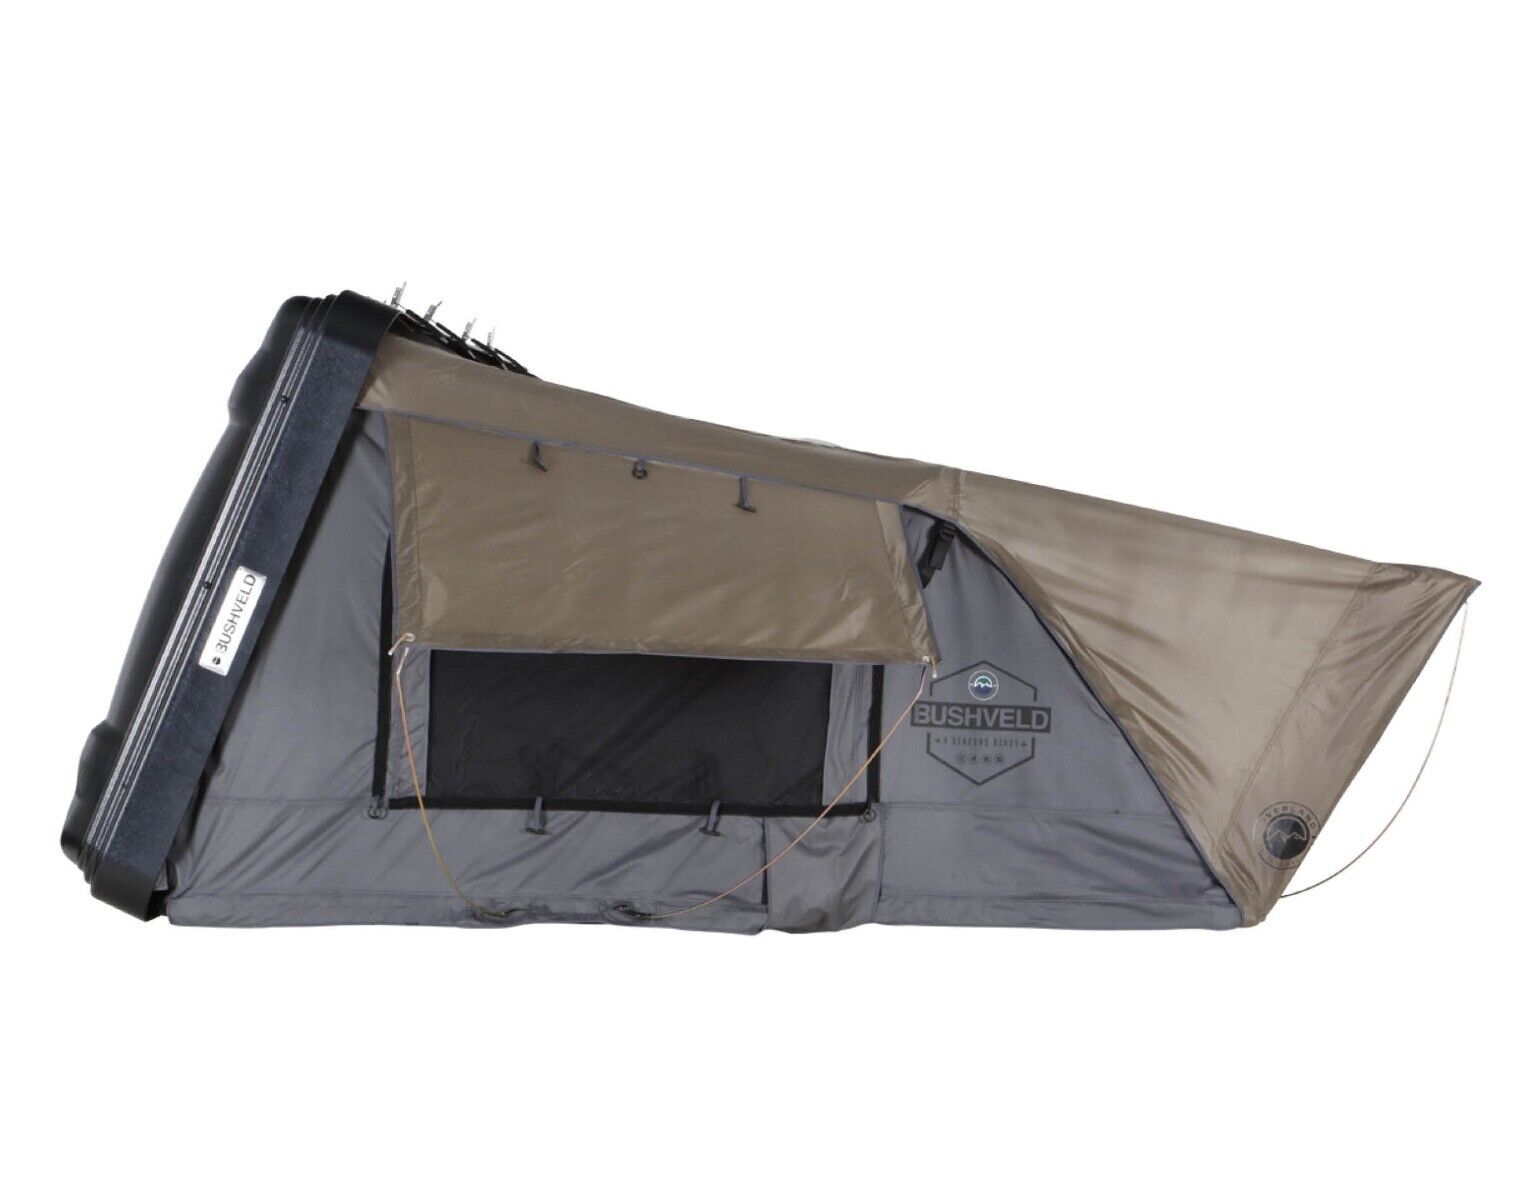 OVS Bushveld II Hard Shell Roof Top Tent 2 Person 18189901